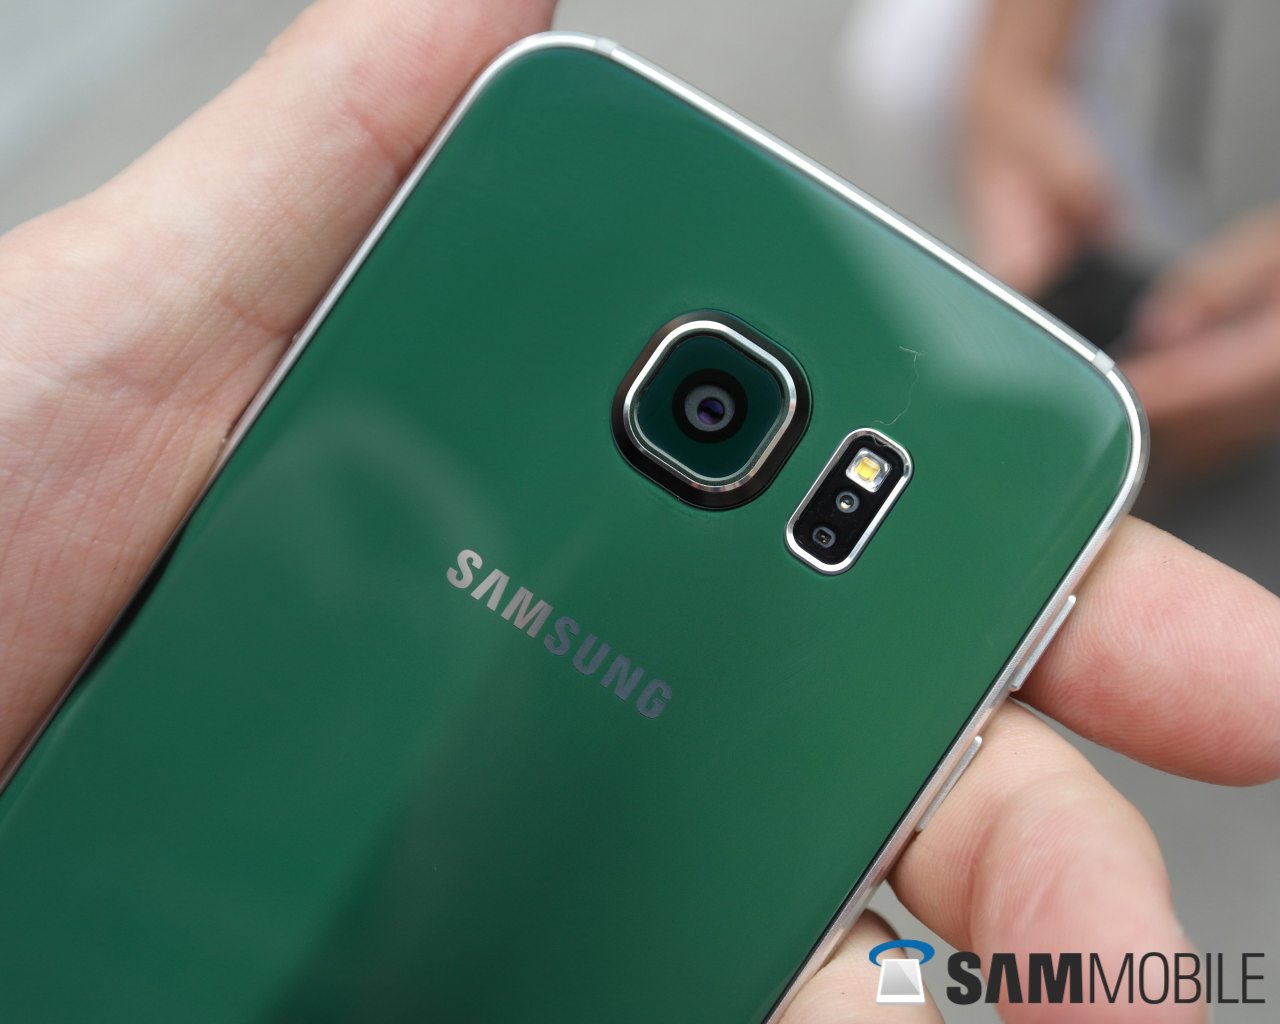 Galaxy S6 Edge Gets The Edge Over The Note 4 Iphone 6 And 6 Plus In Camera Shootout Sammobile Sammobile